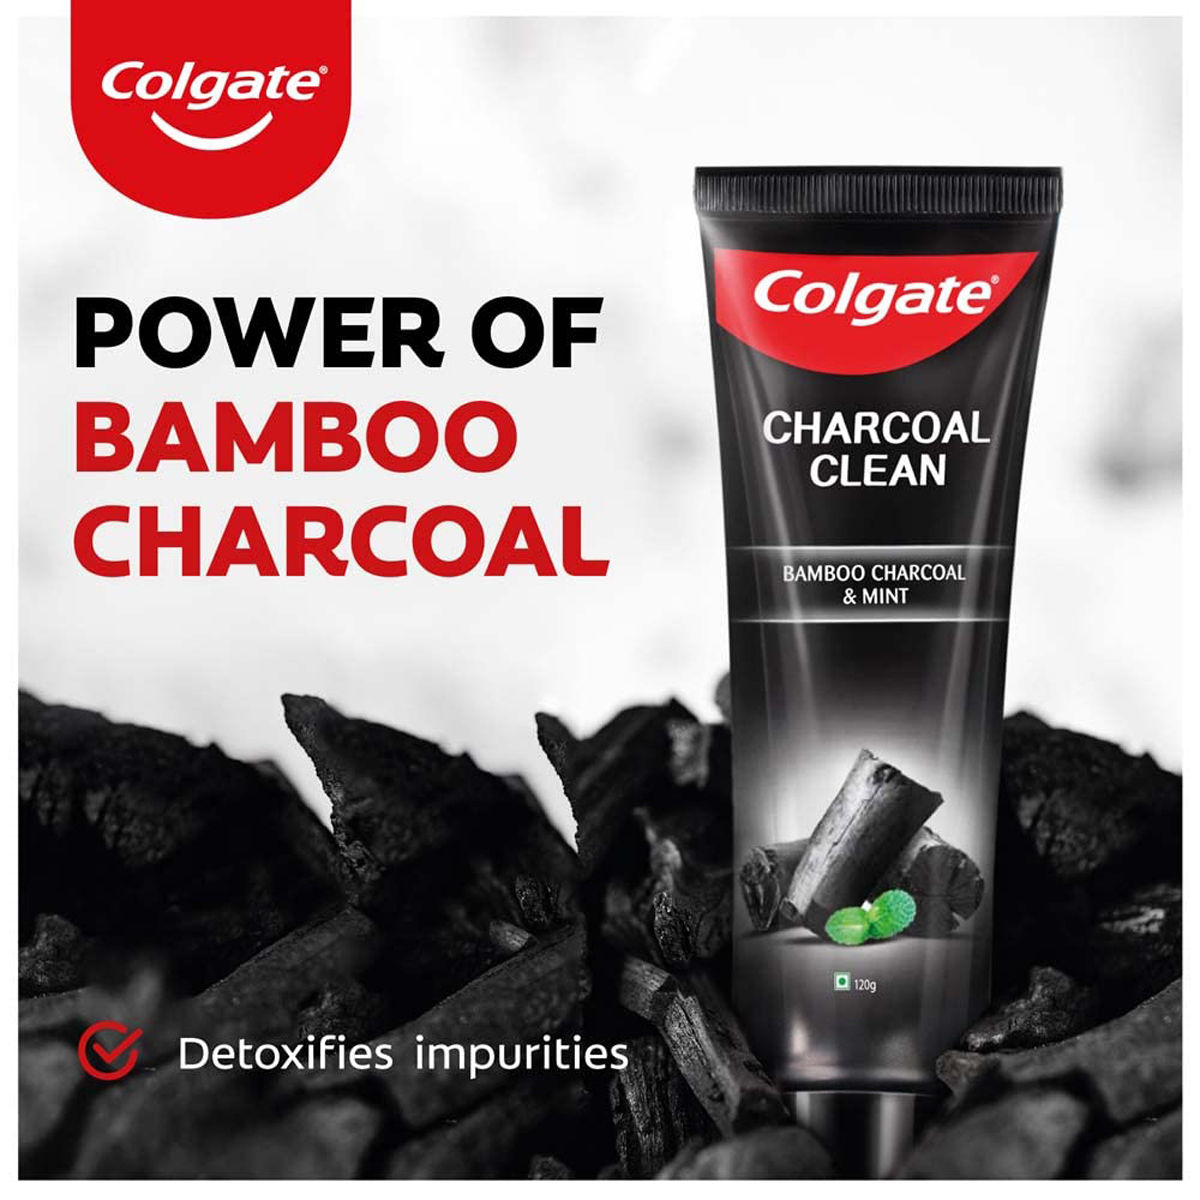 Colgate Charcoal Clean Toothpaste Bamboo Charcoal & Mint, 120 gm, Pack of 1 